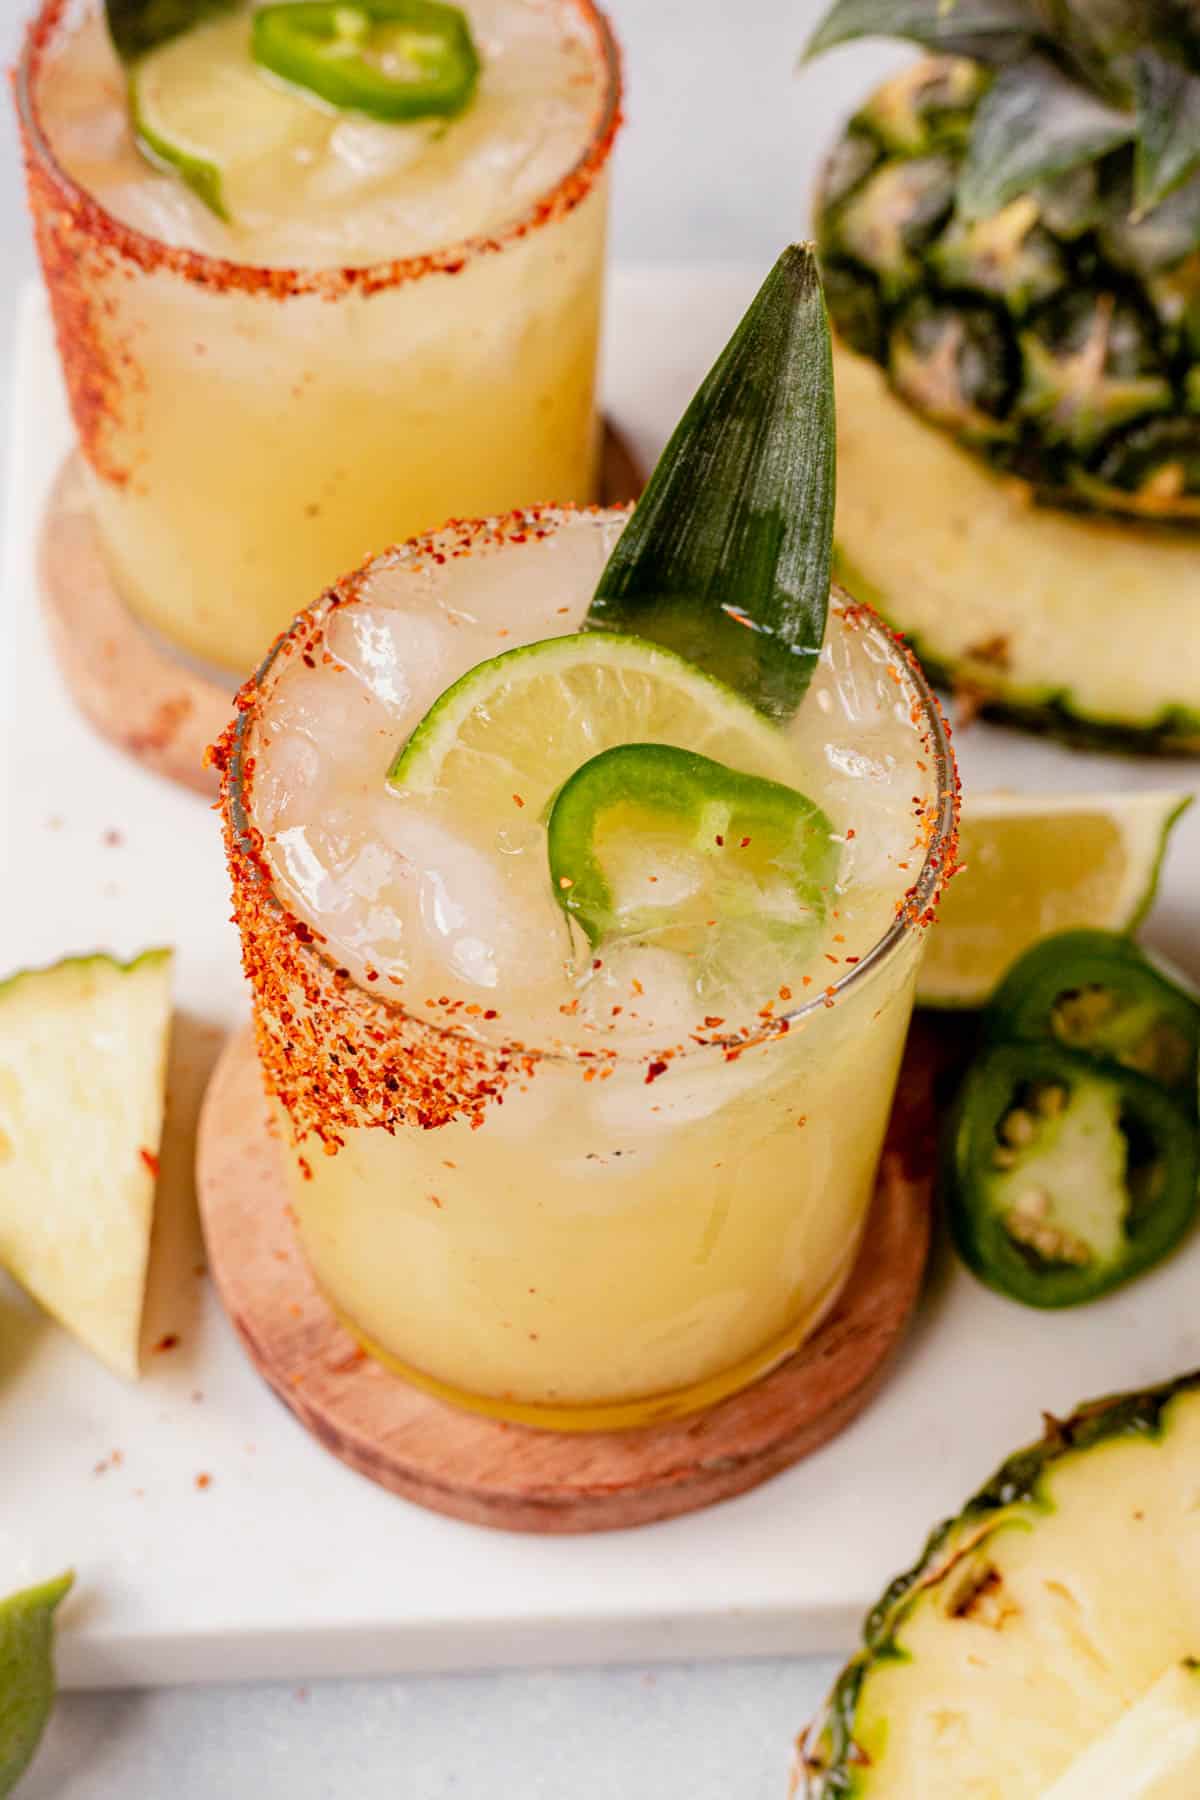 jalapeno and a pineapple leaf in a pineapple margarita